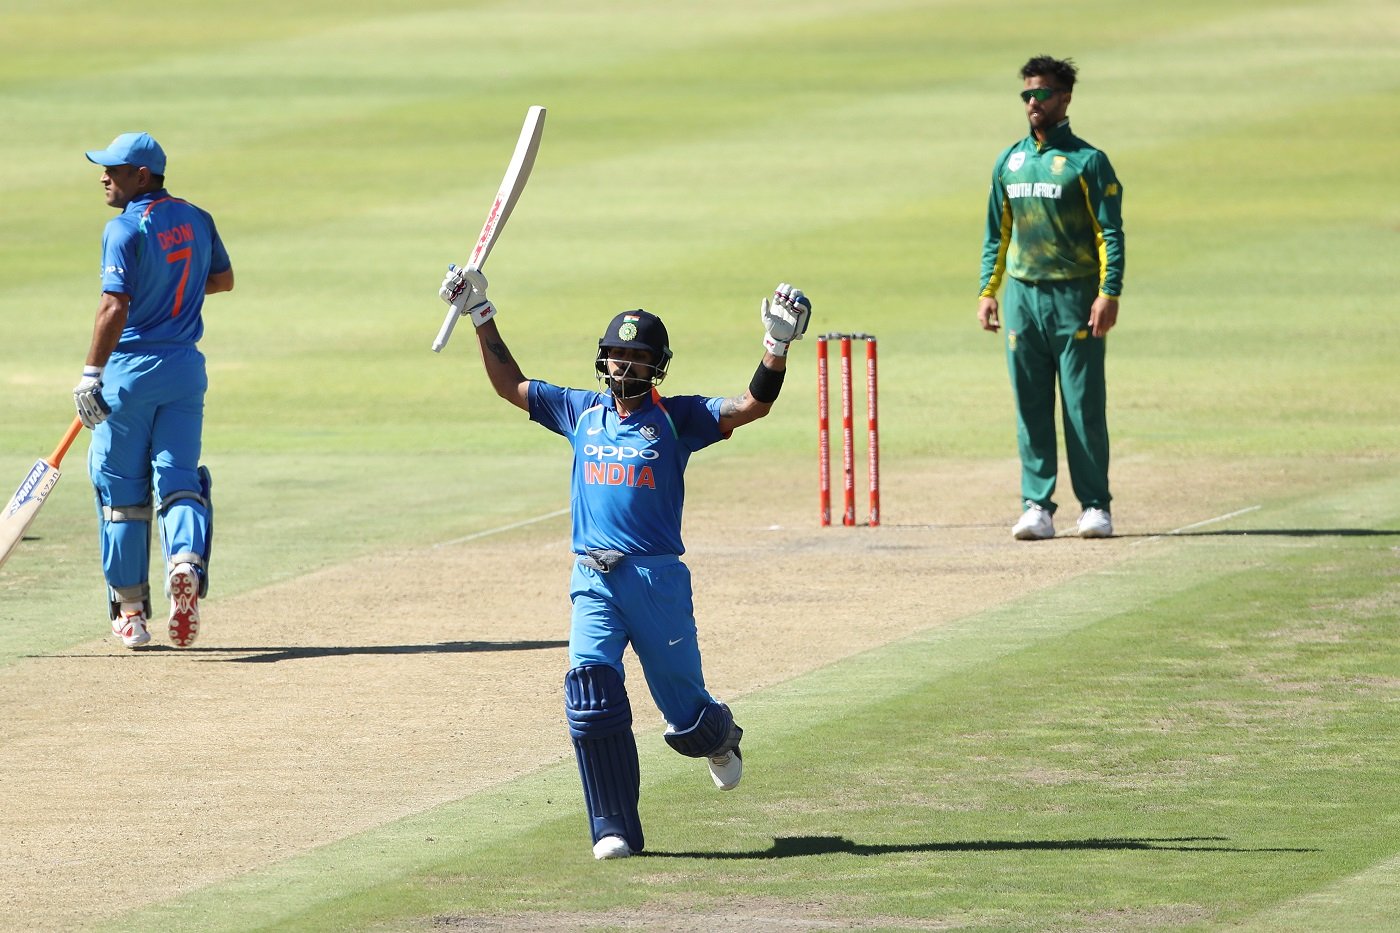 resolute technique pakistan legend javed miandad thinks india skipper virat kohli s flawless batting methods allow him to adjust to any condition and score runs photo courtesy bcci